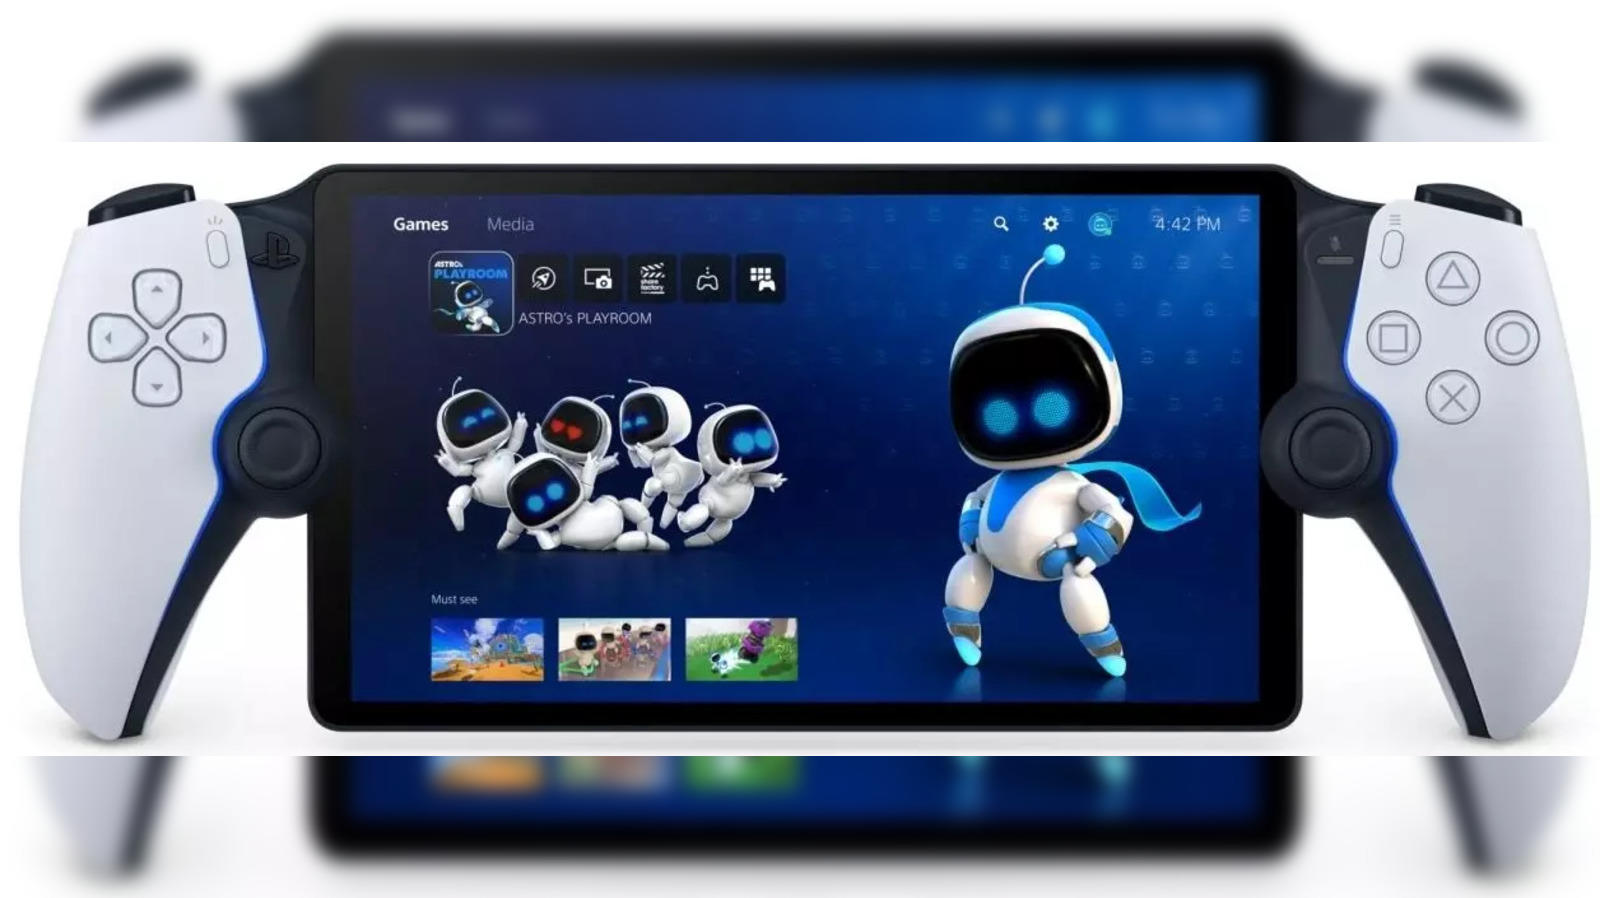 Sony PlayStation Portal: price, availability, and how to preorder